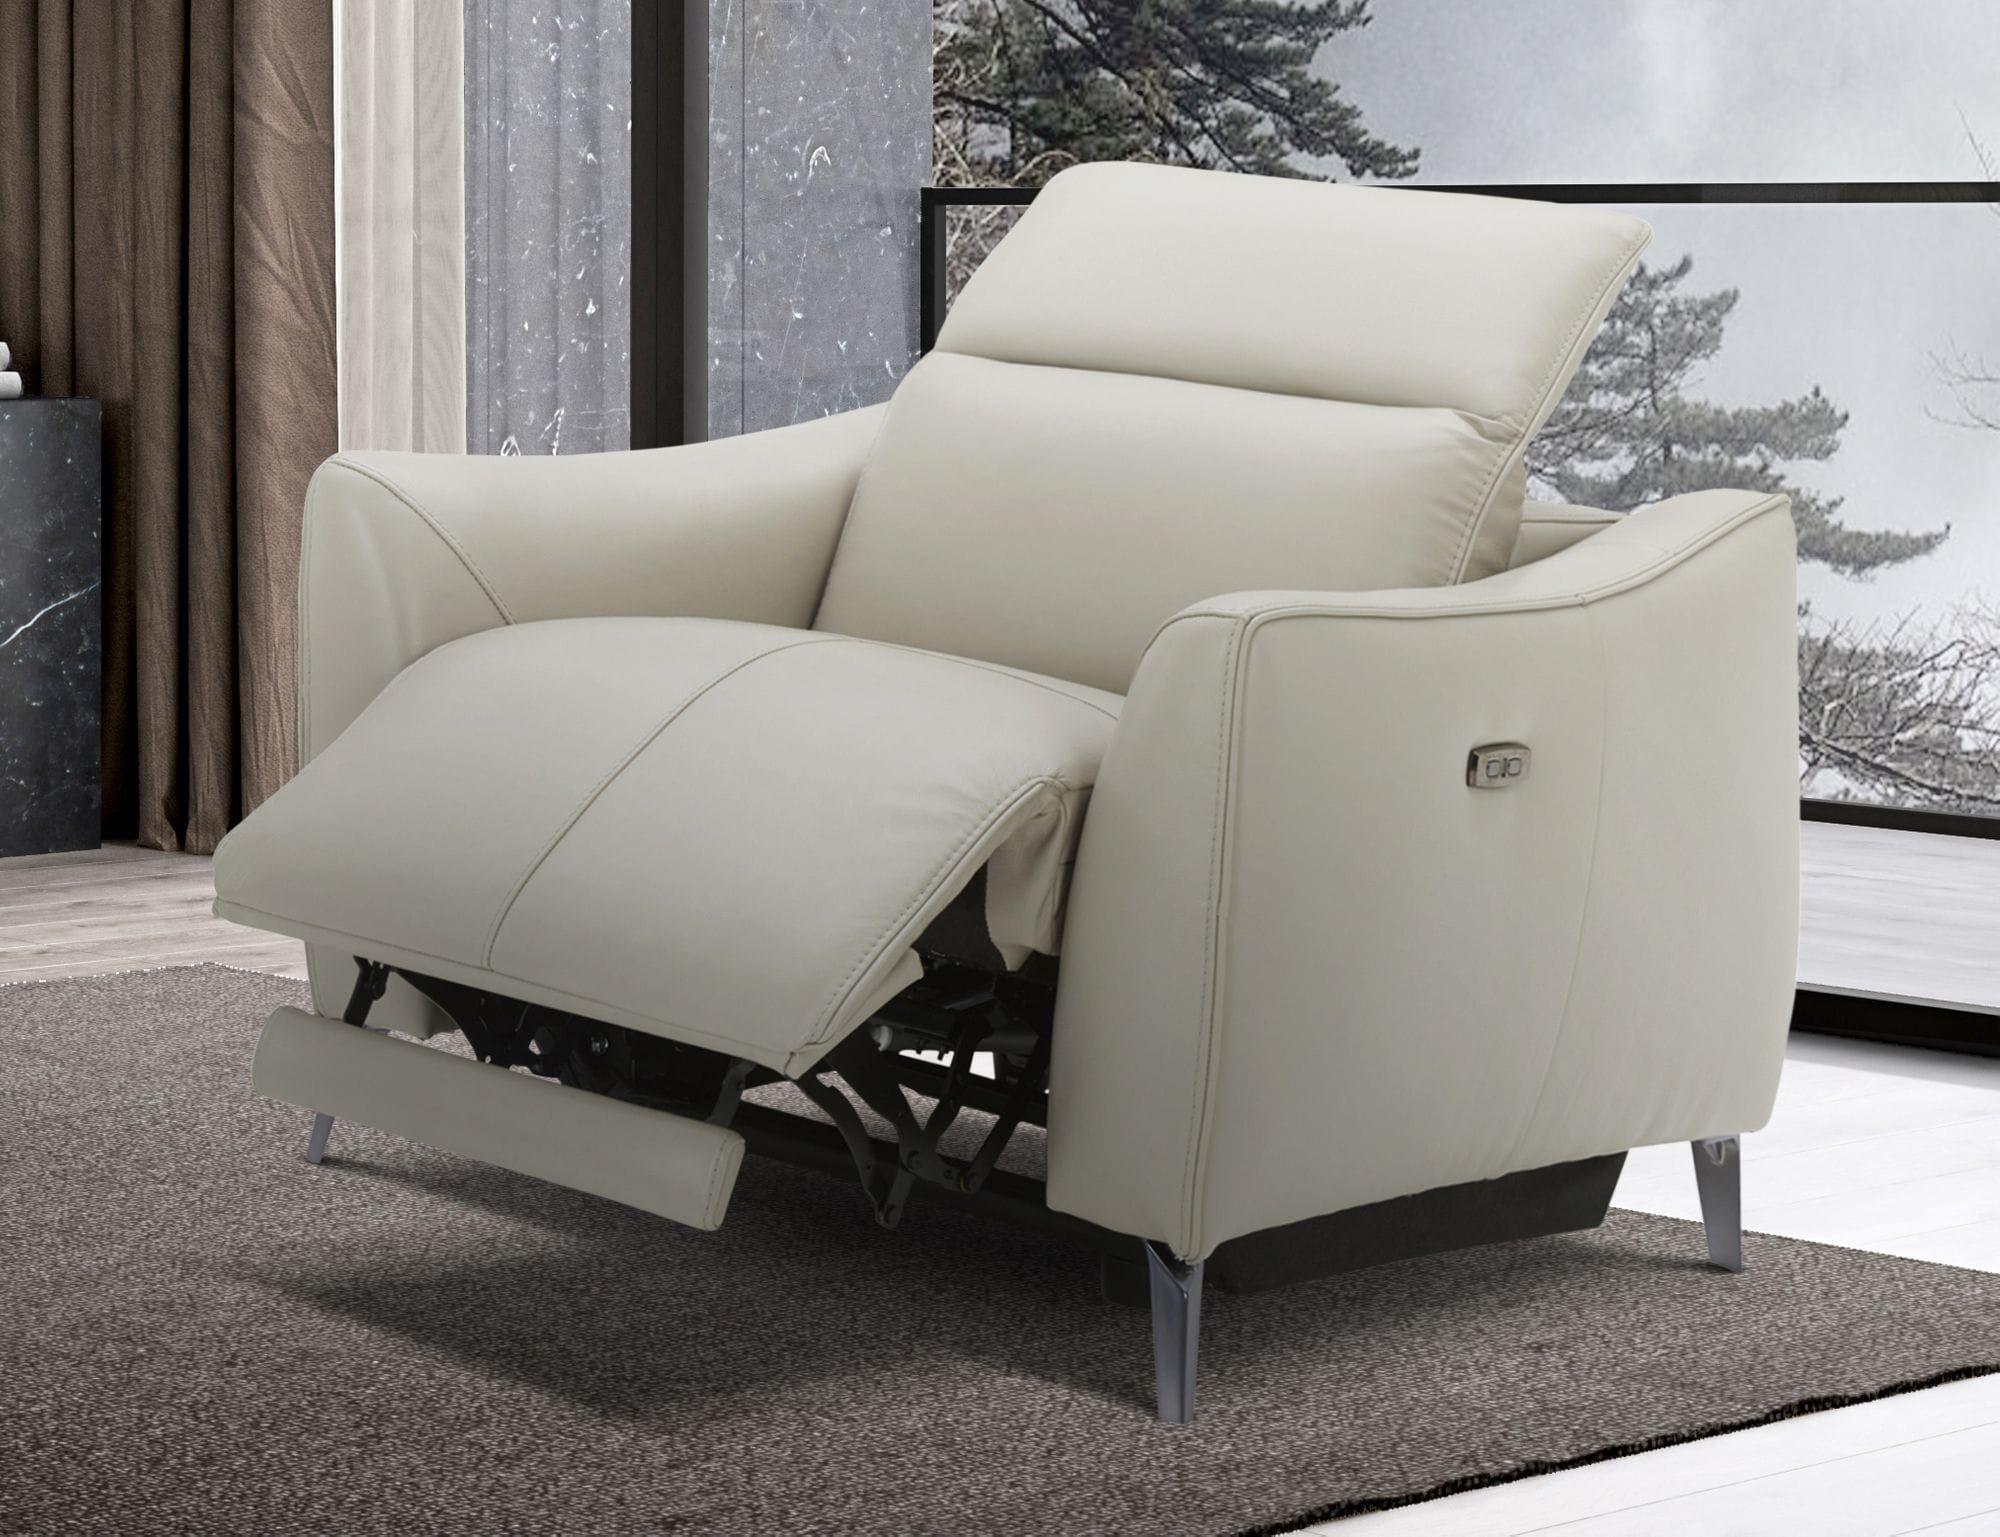 Contemporary, Modern Recliner Chair VGKMKM.381H-DK-GRY-CH VGKMKM.381H-DK-GRY-CH in Light Grey Genuine Leather